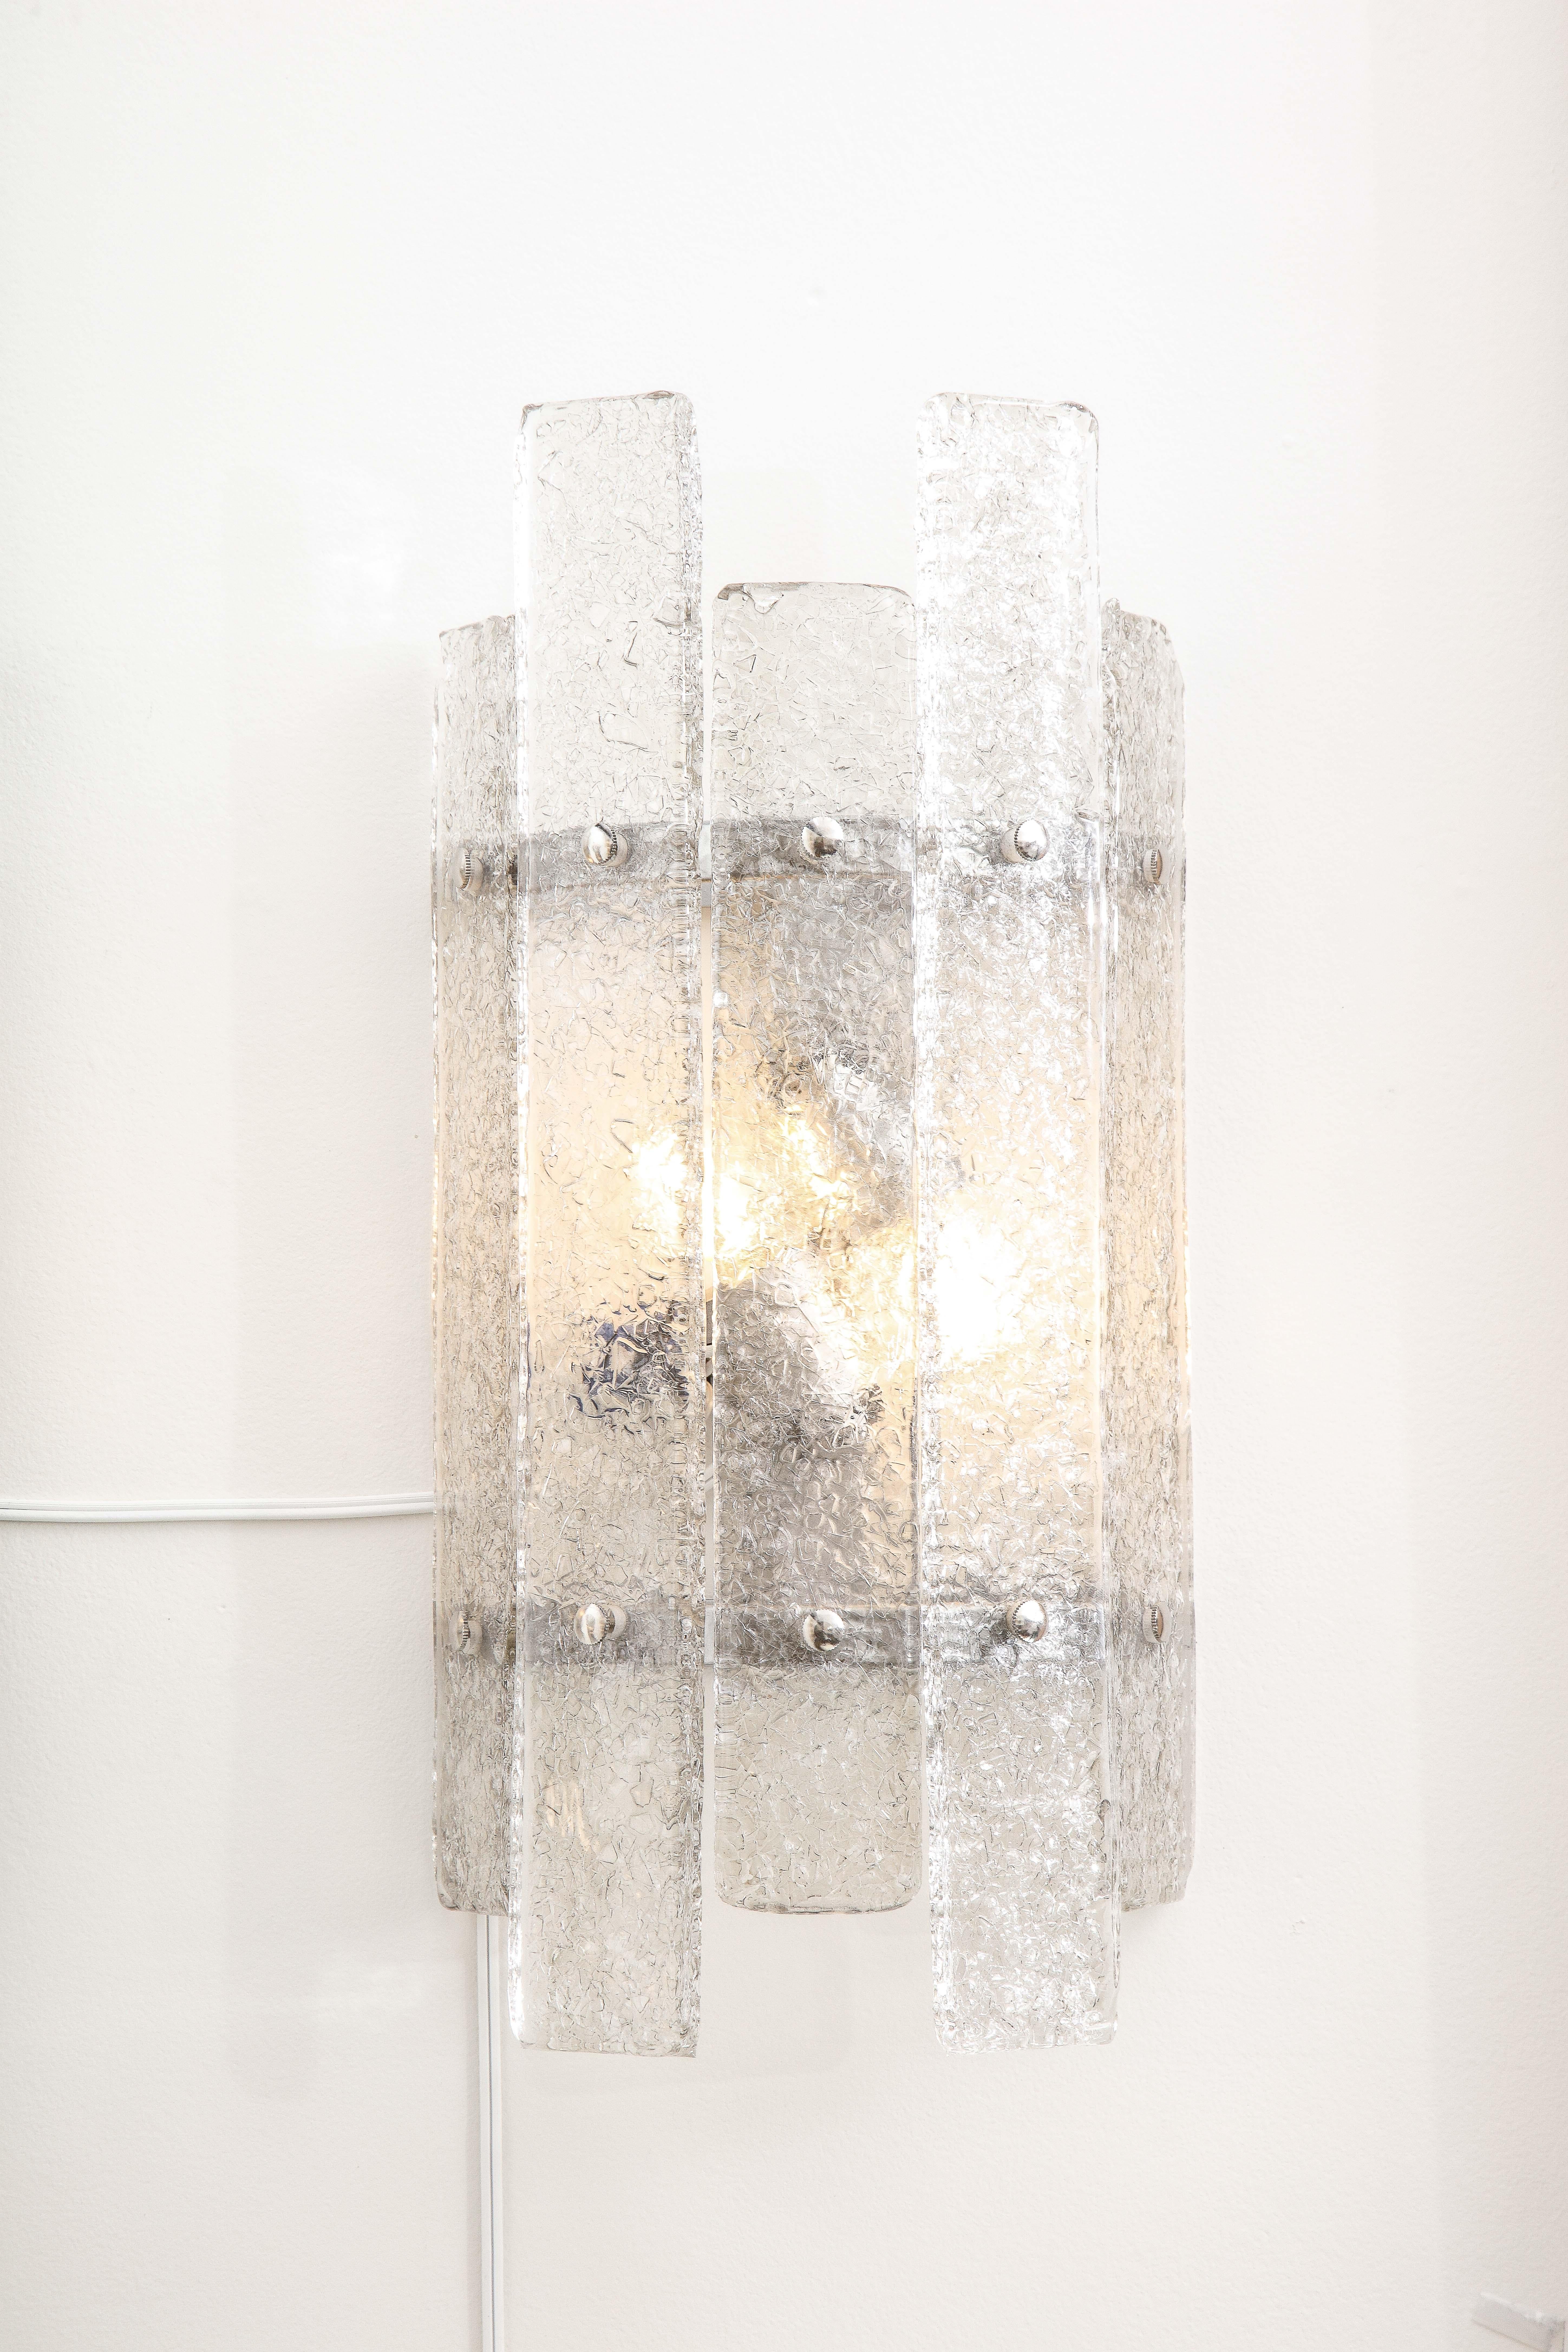 Pair of clear and textured Murano glass and Nickel sconces handcrafted in Italy. Each sconce consists of individually casted and textured clear Murano glass rectangular rods which are held in place with solid nickel capped screws onto a nickel